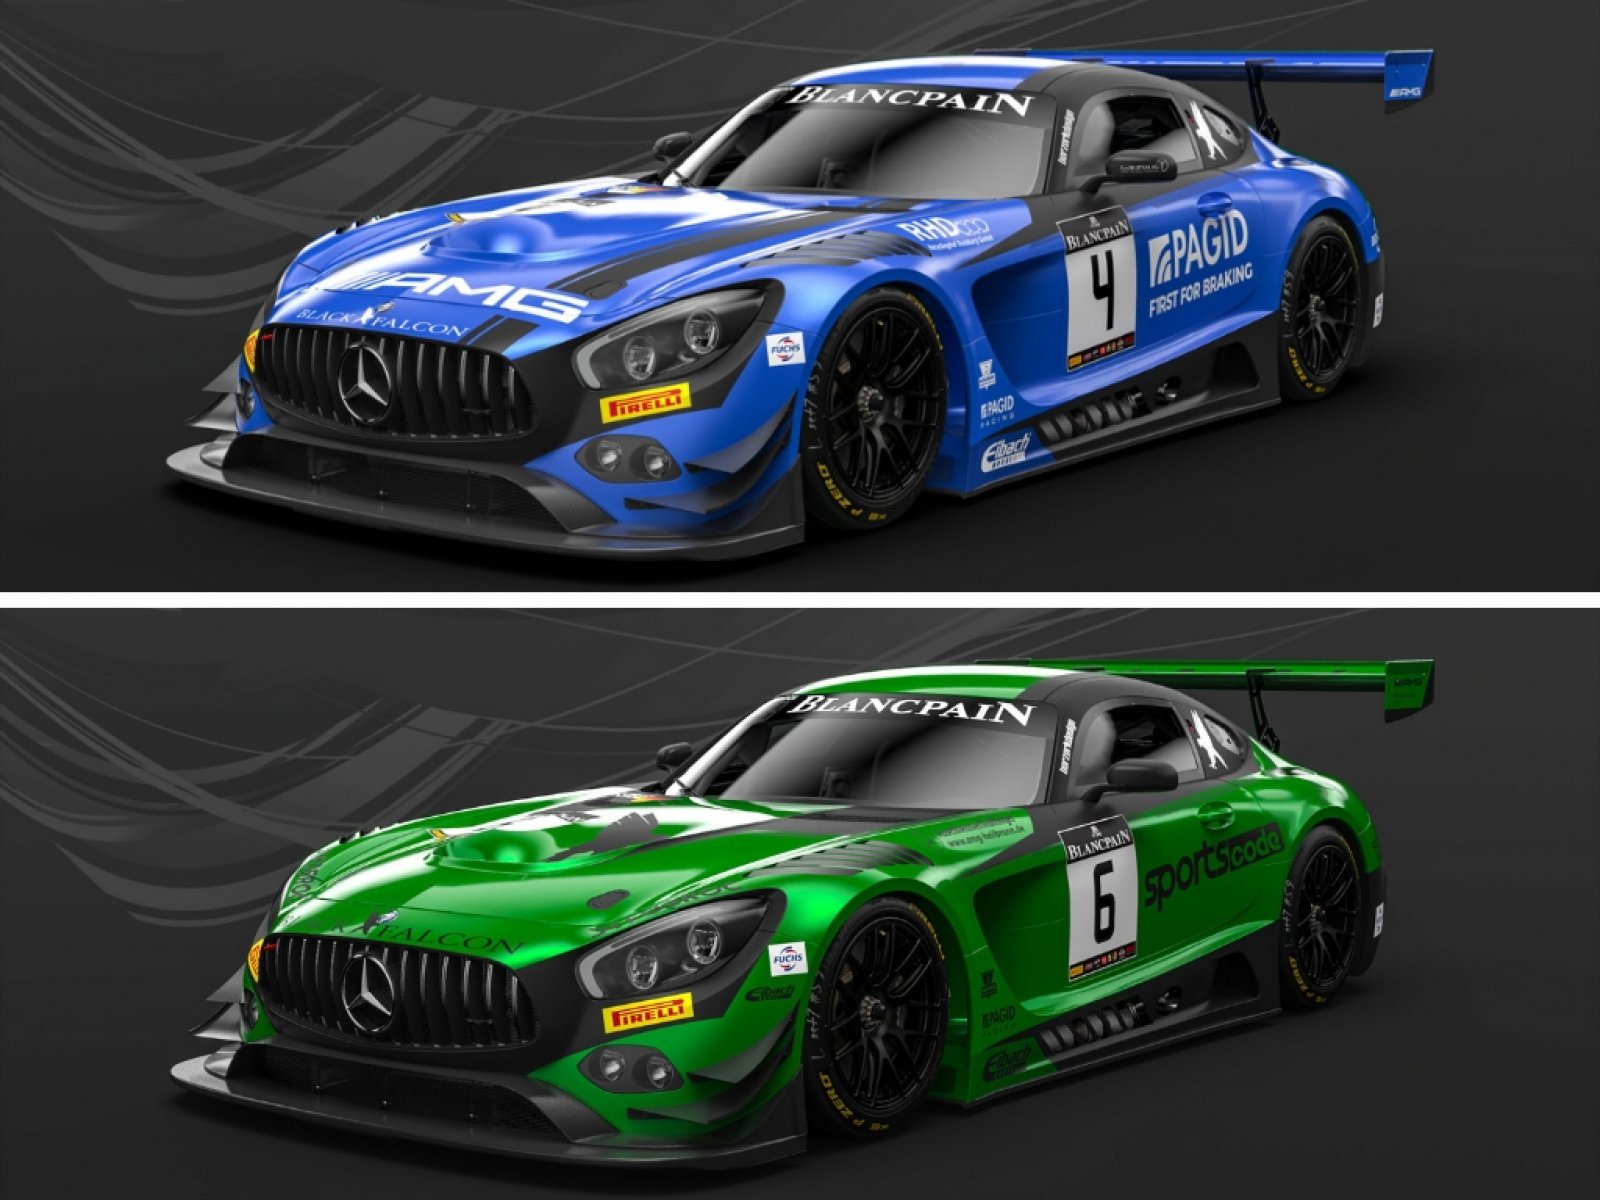 Black Falcon reveals full-season Blancpain GT Series assault with #4 Mercedes-AMG